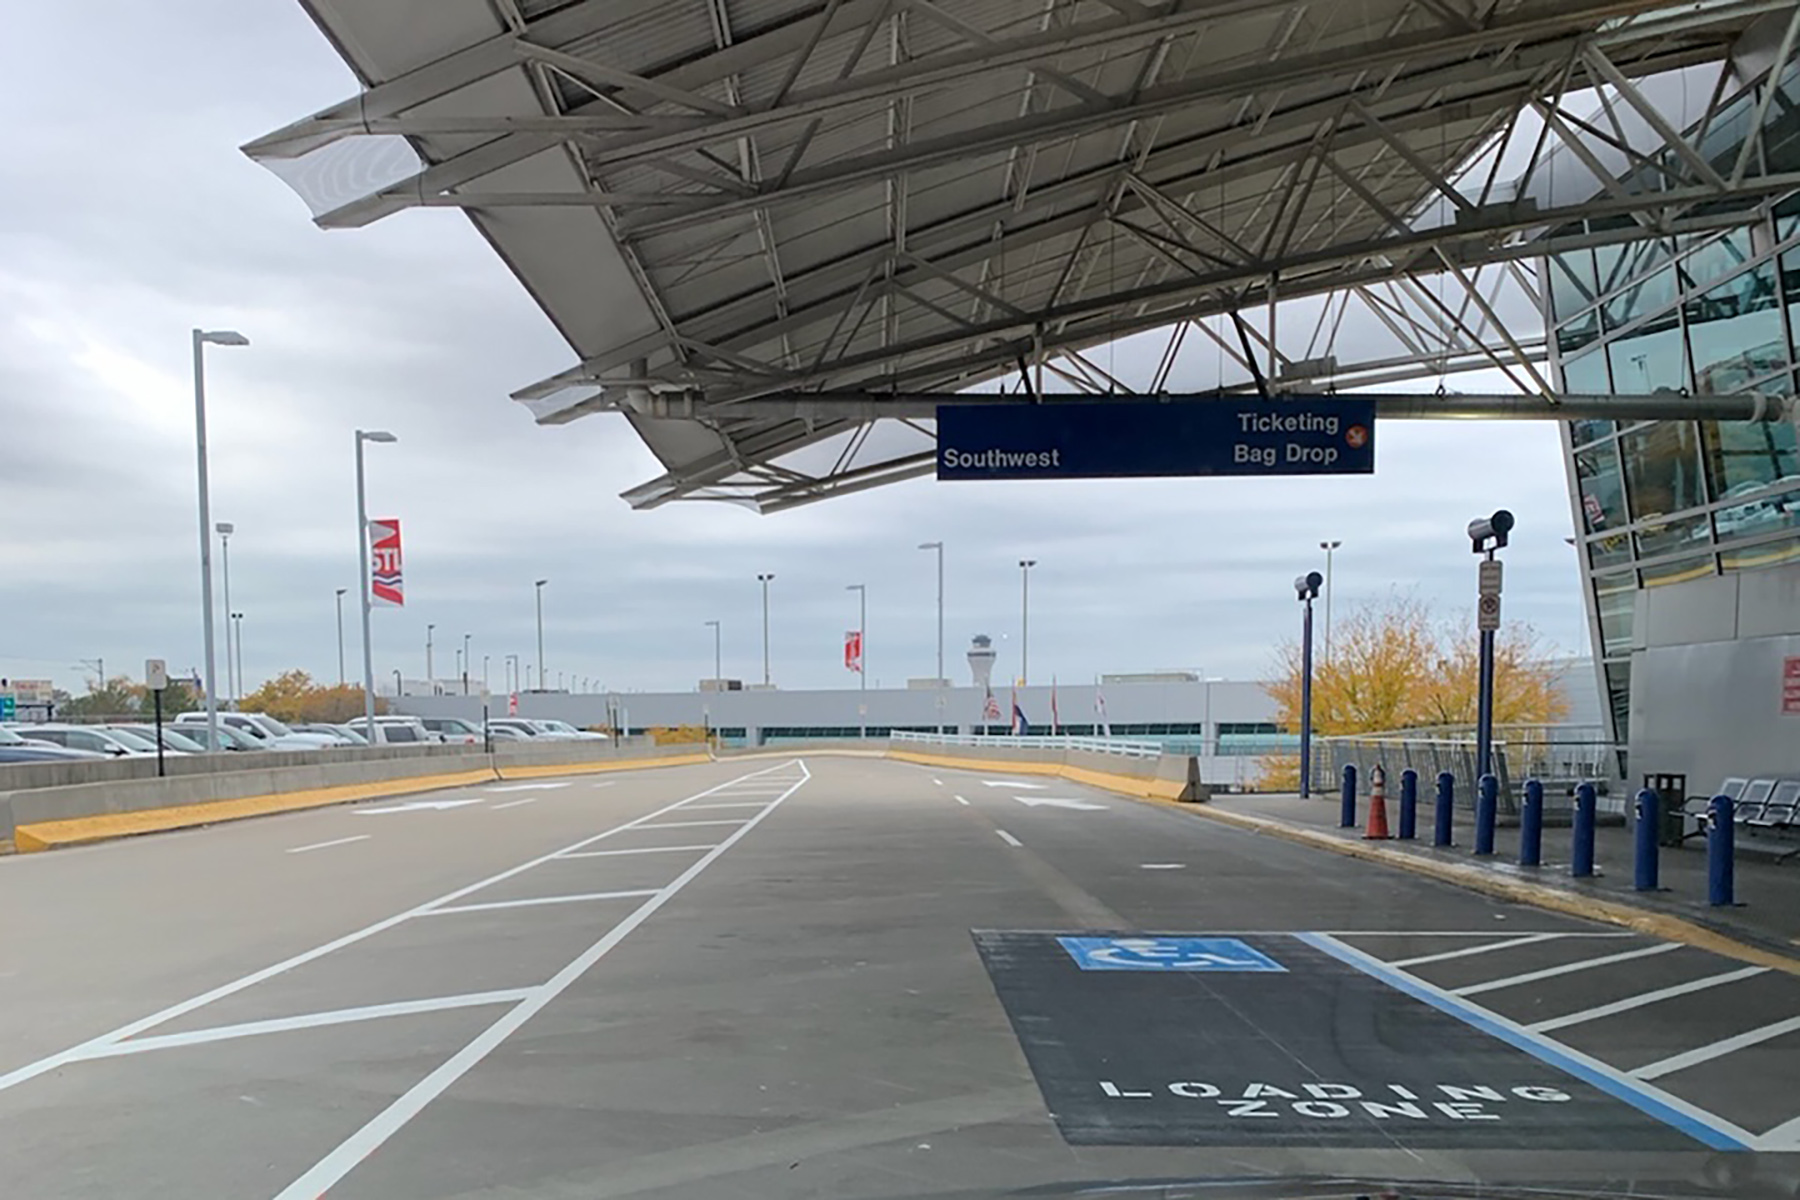 the Airport also expanded the curb by 200 ft. to the east and created two new ADA-compliant drop-off zones